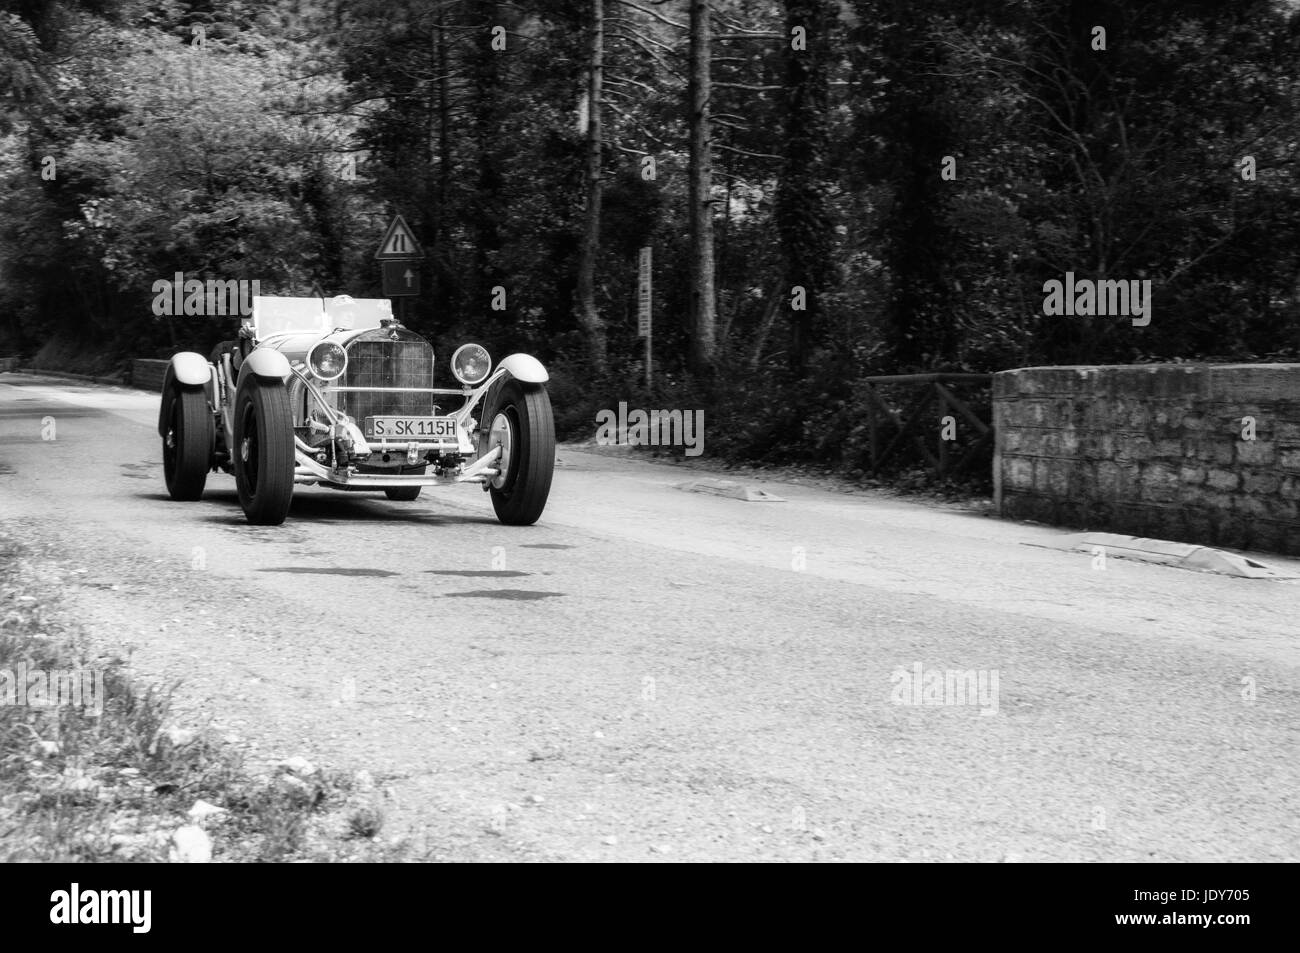 GOLA DEL FURLO, ITALY - MAY 19: MERCEDES-BENZ 710 SSK 1928 on an old racing car in rally Mille Miglia 2017 the famous italian historical race (1927-19 Stock Photo